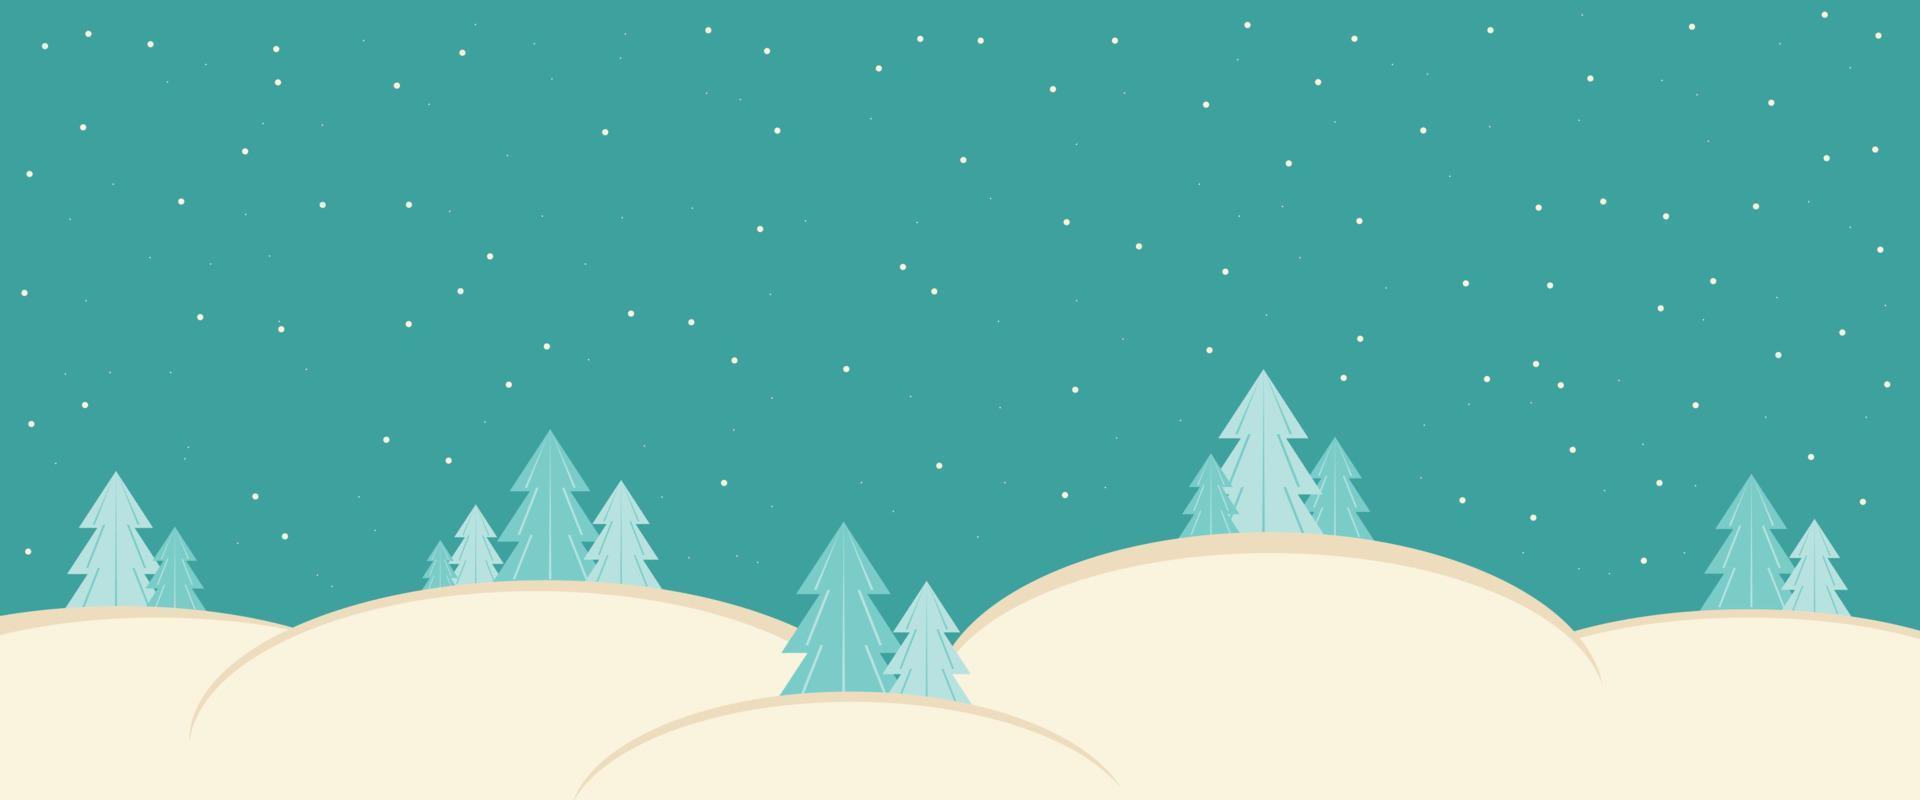 Winter background with snowdrifts and Christmas trees on a blue sky with snow. vector